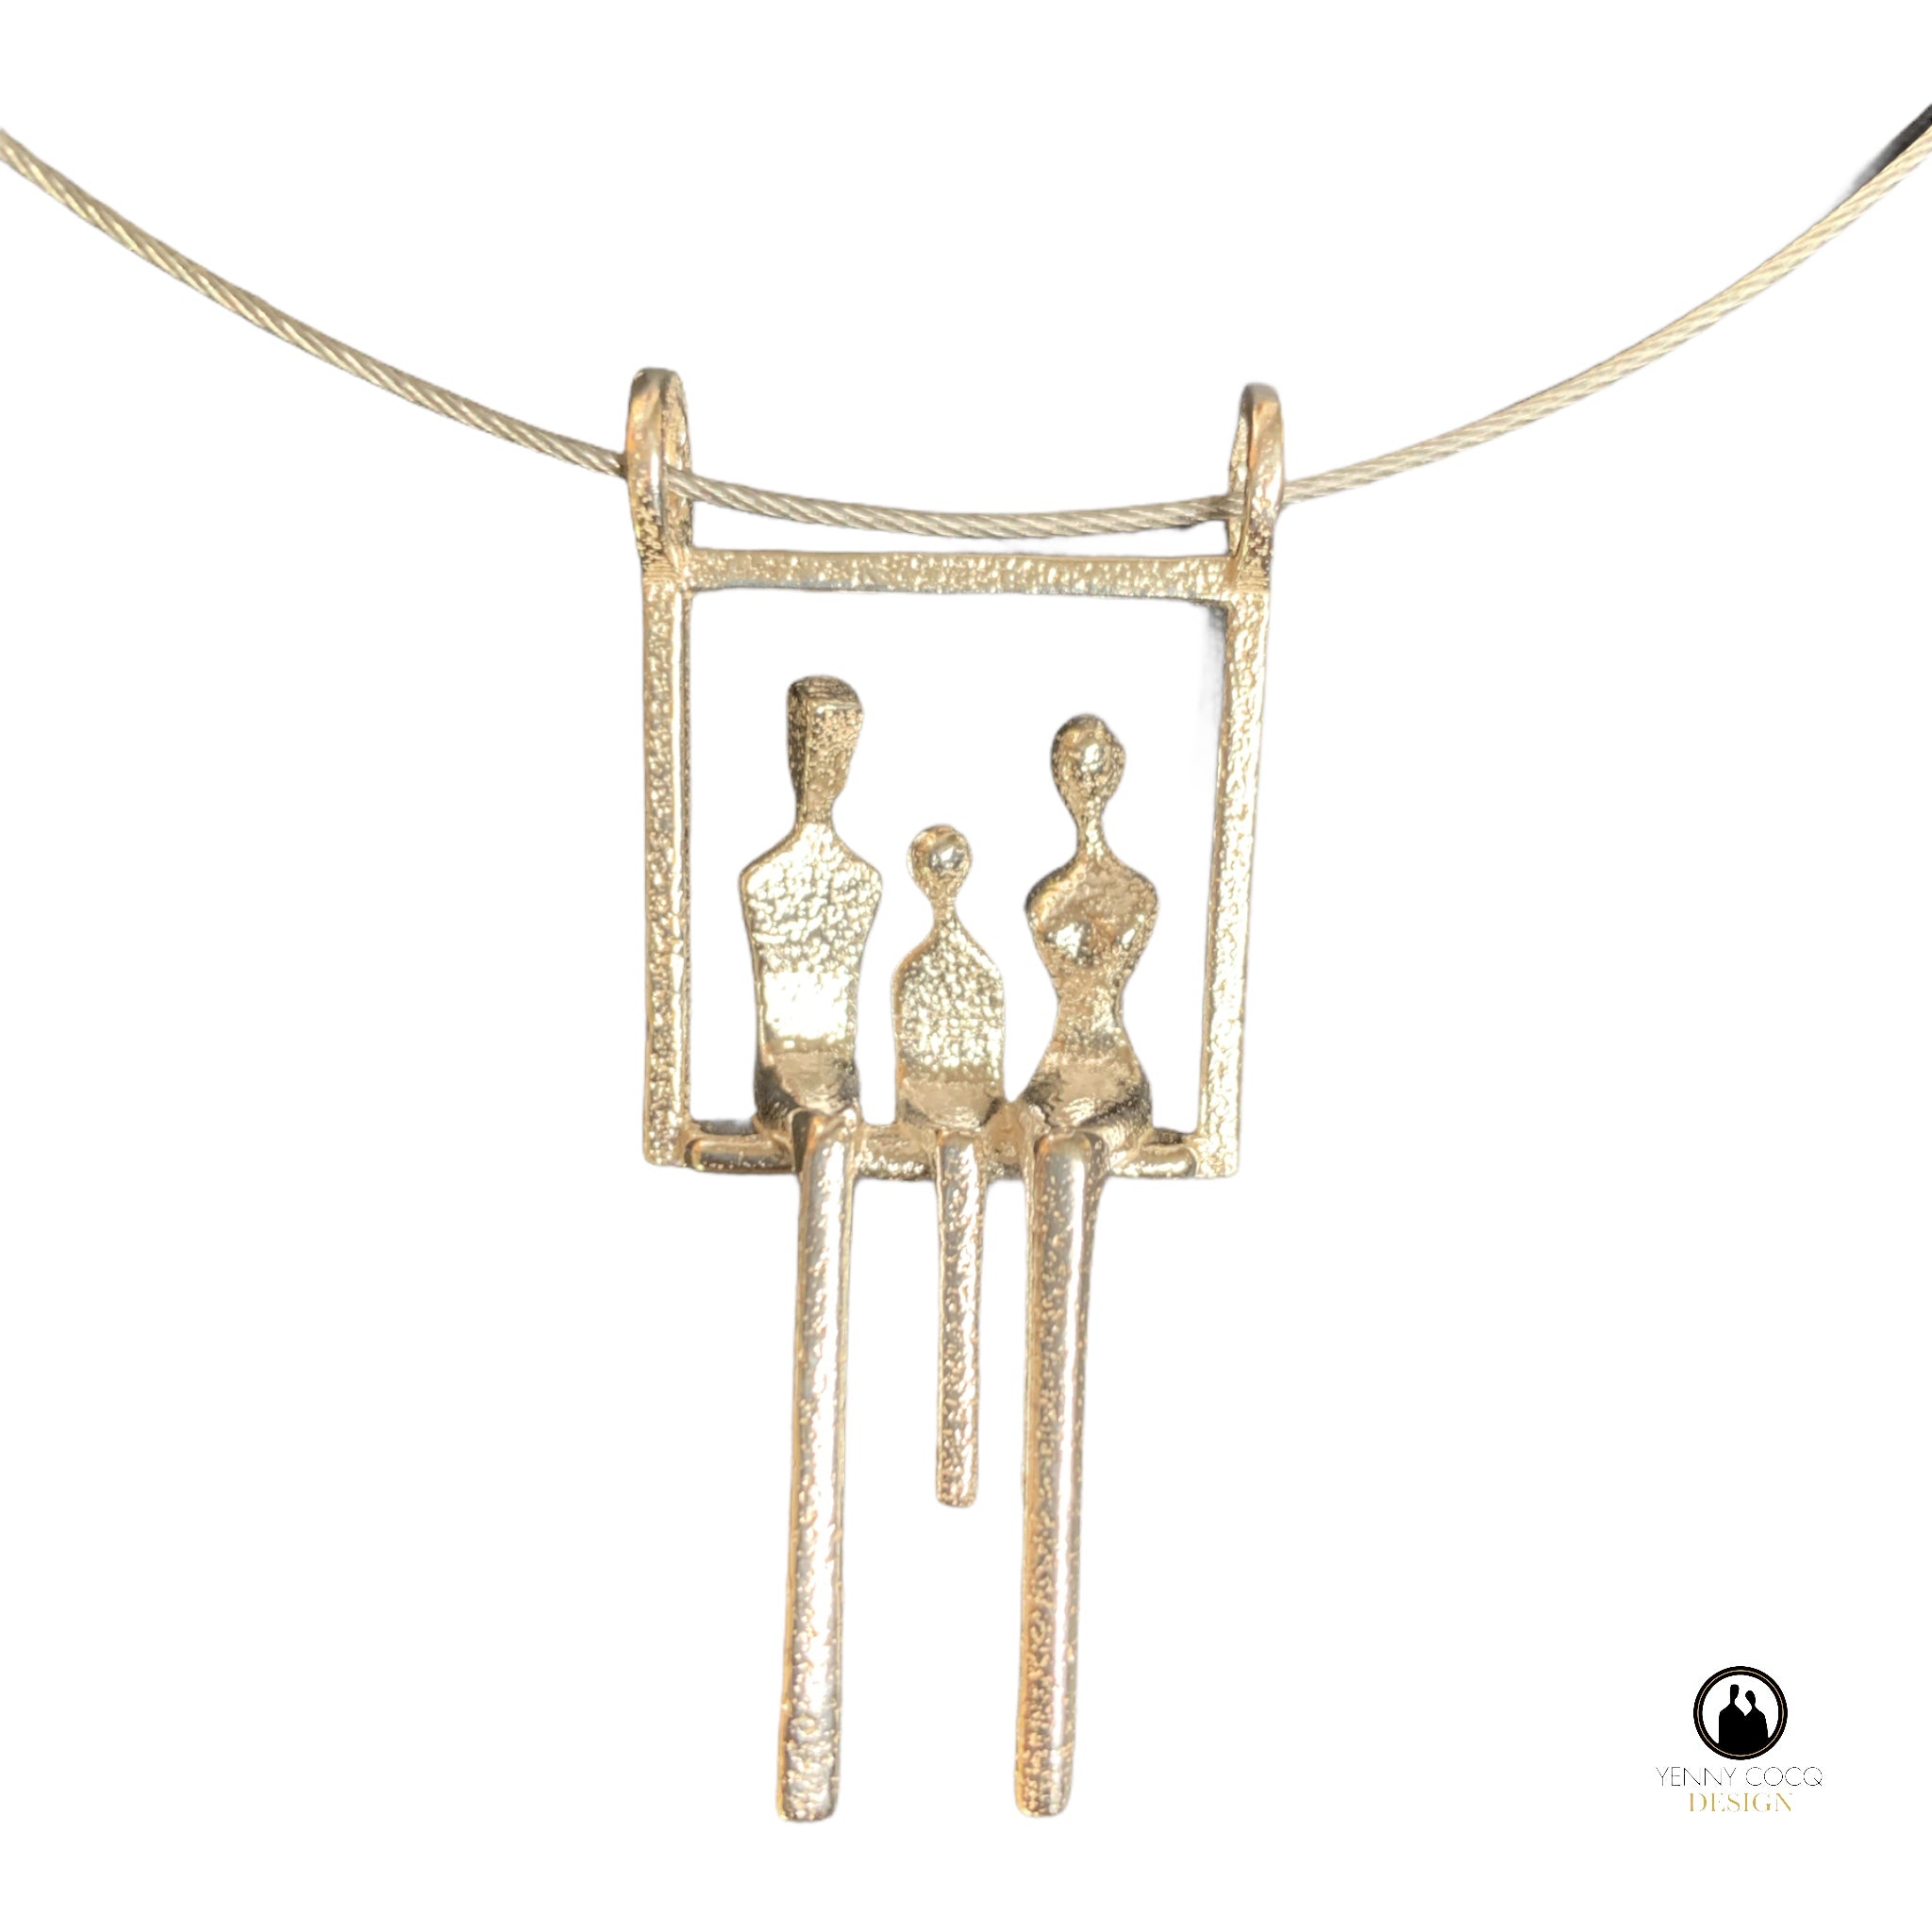 A mother and father with child in a swing in silver